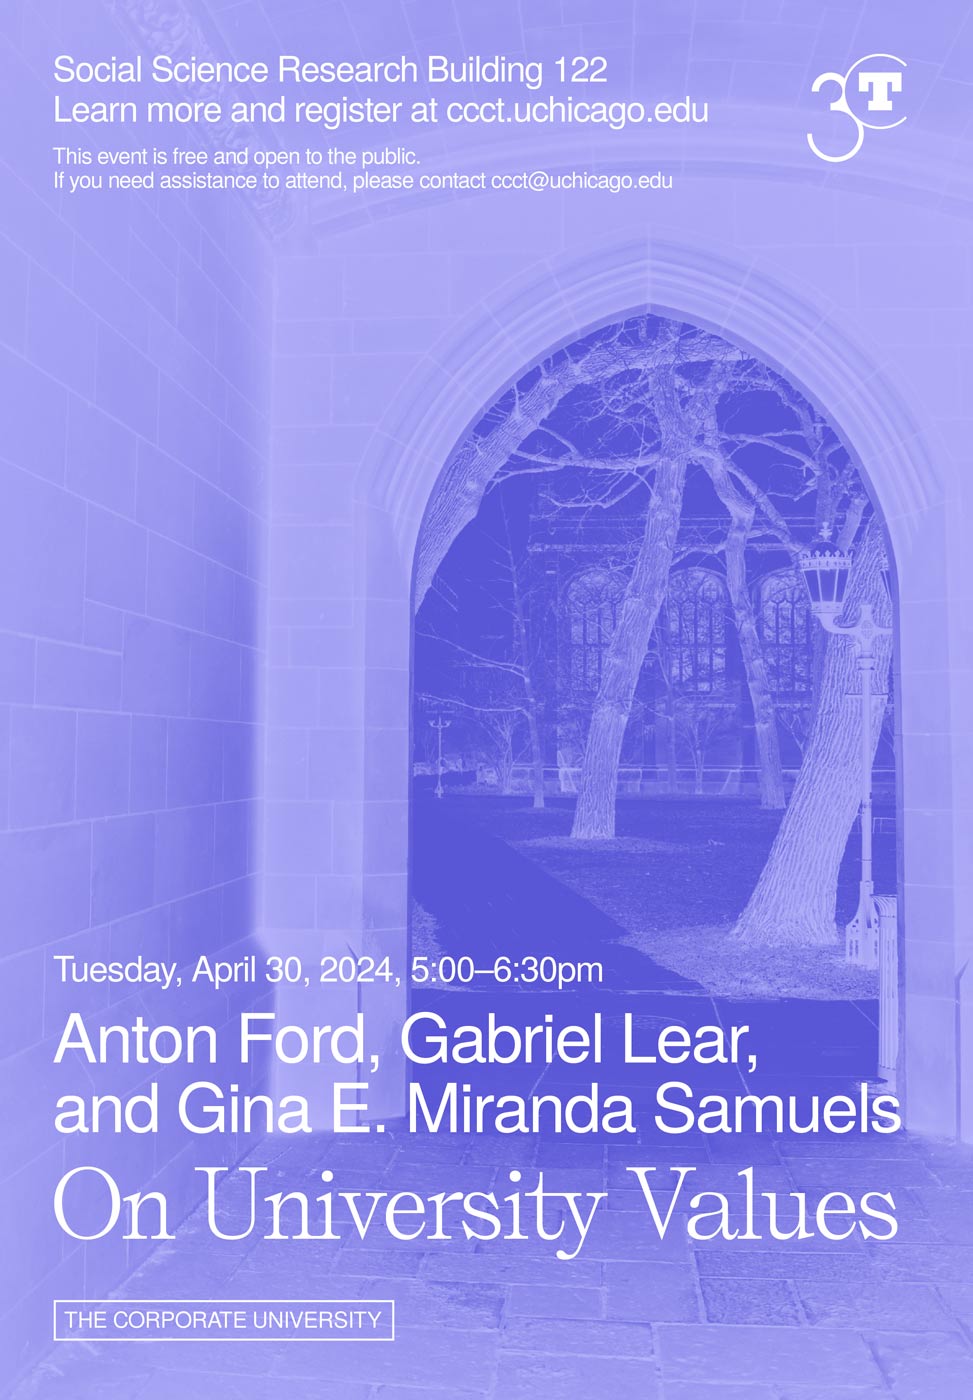 poster with purple-toned image of an arch with trees and a path beyond it overlaid with white text